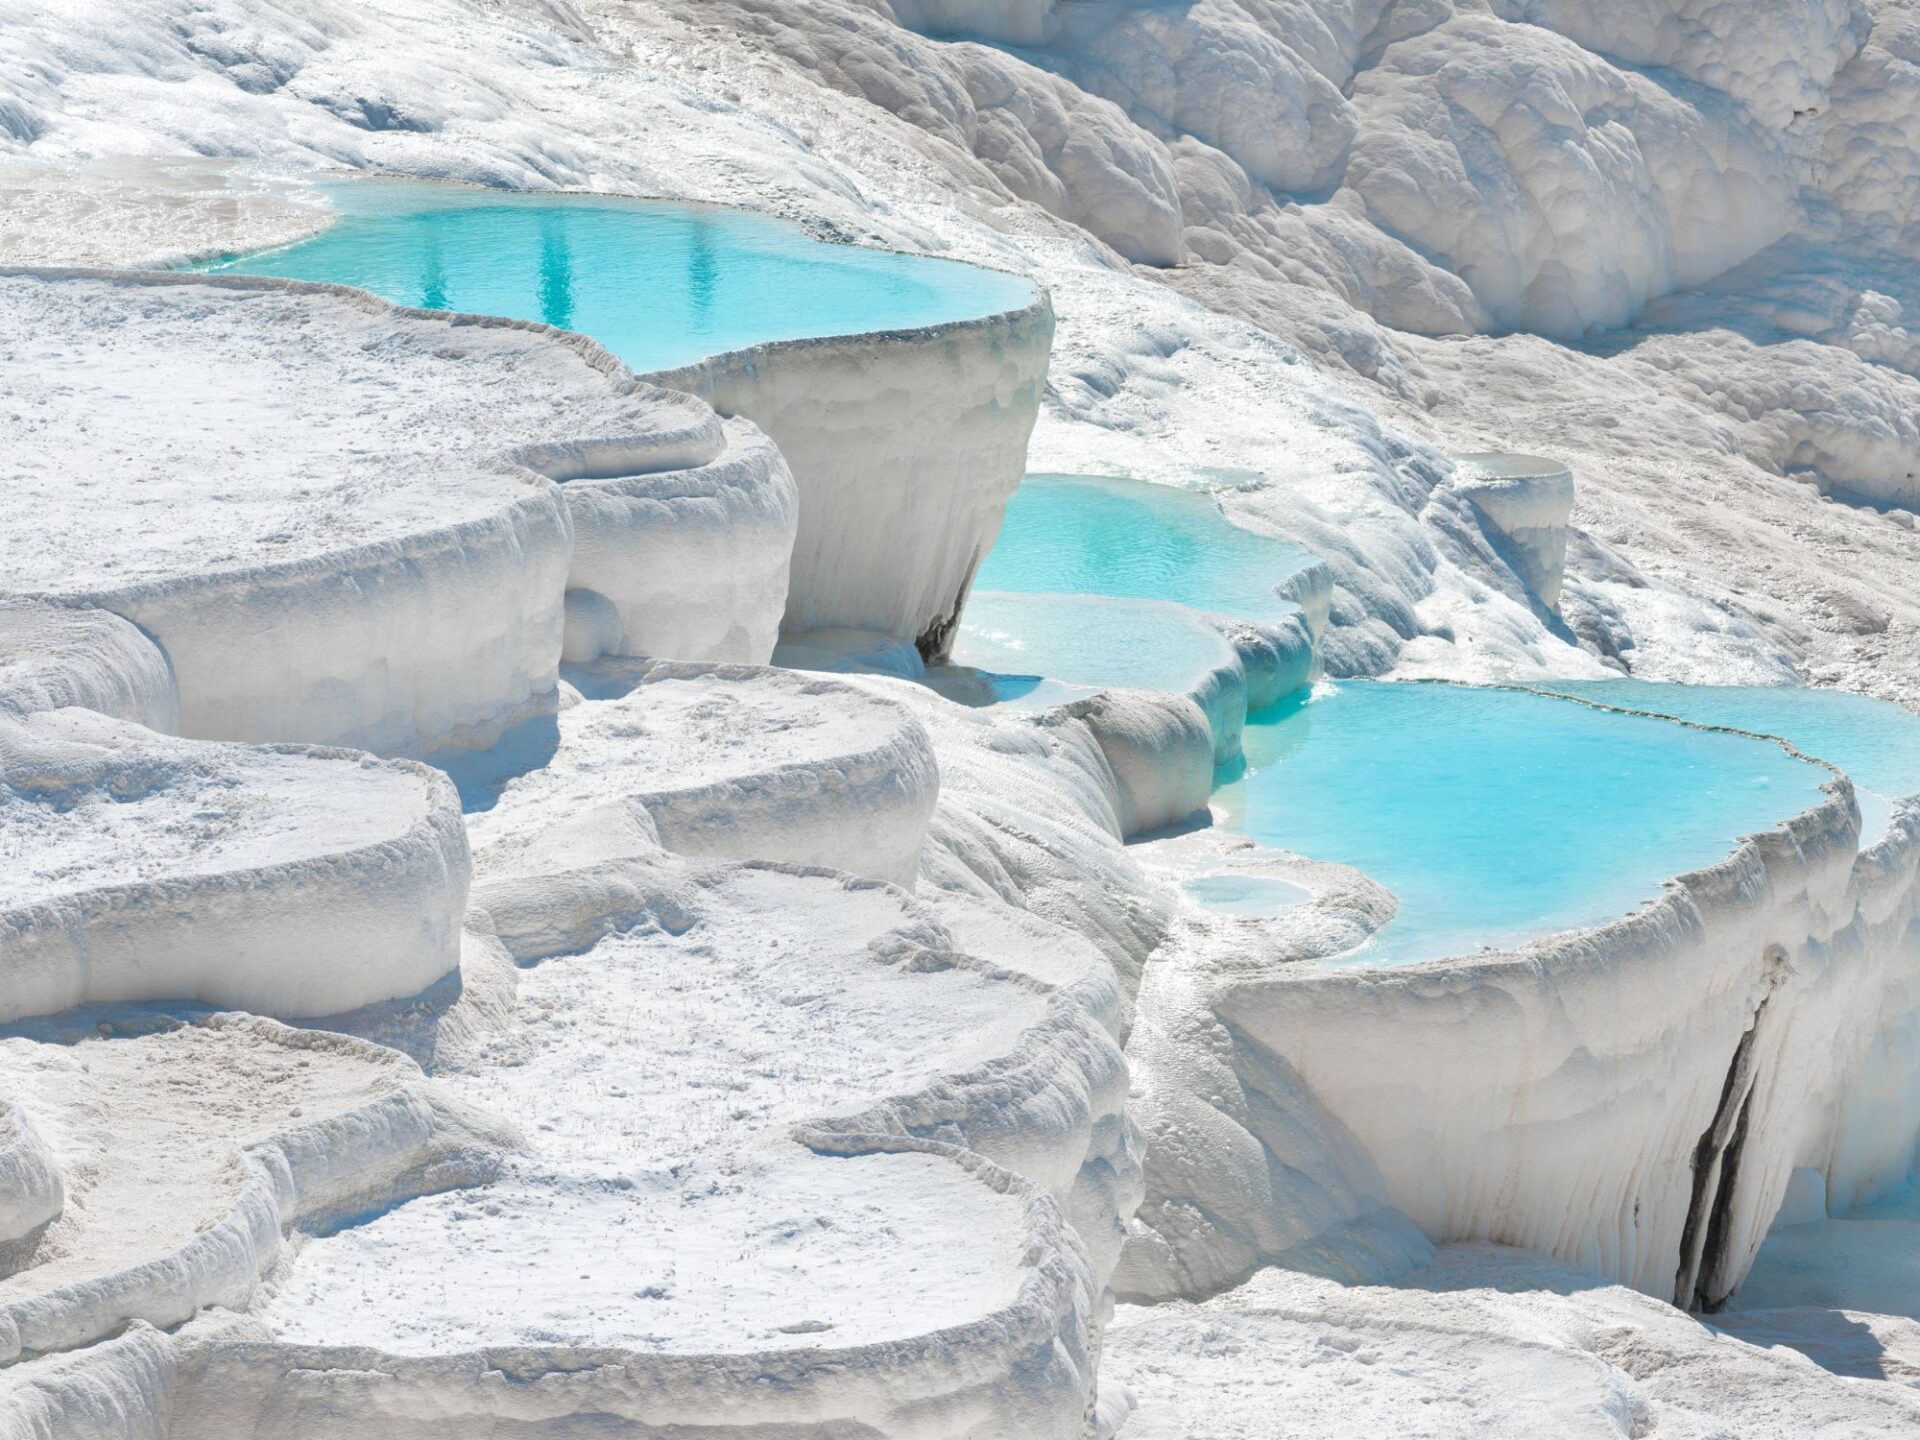 What to see on your first visit to Turkey from UAE - Pamukkale